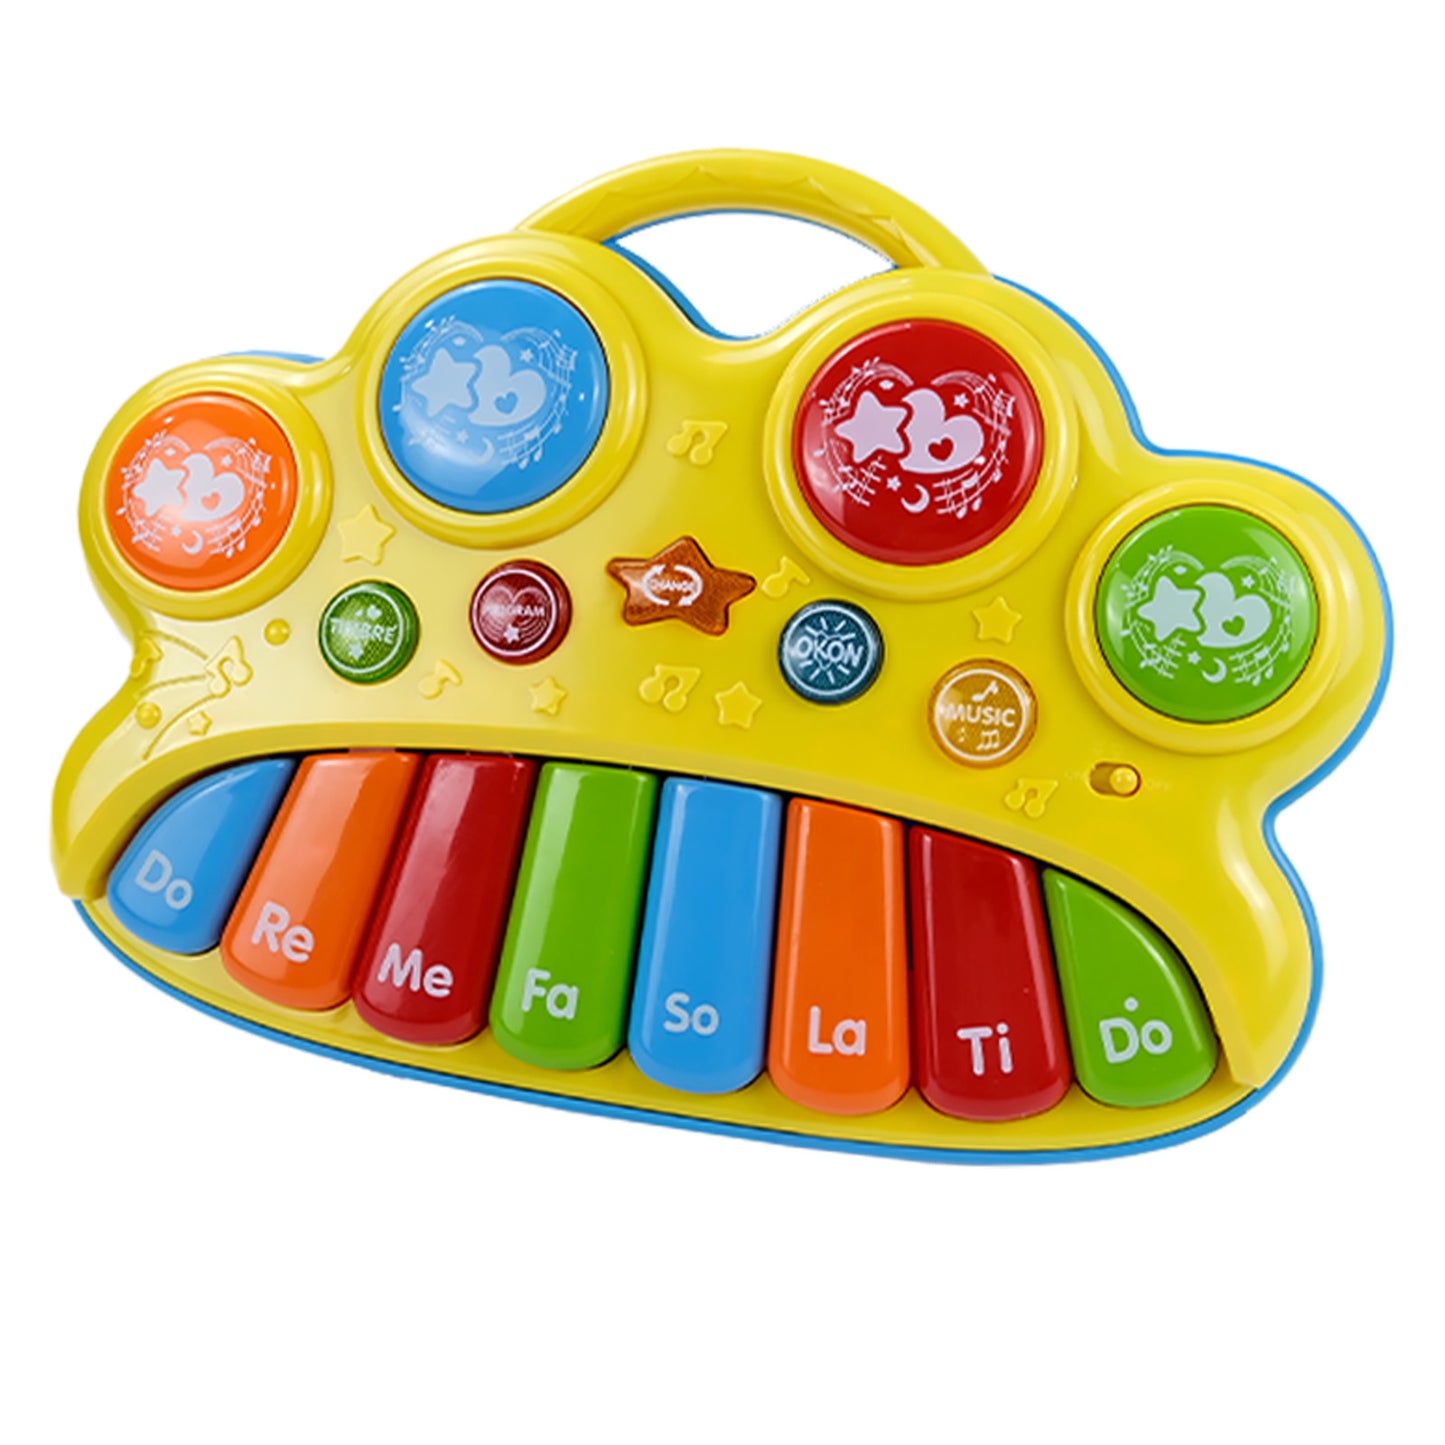 AOQIMITENJOY Musical Instrument Electronic 8 Keys with 4 Drums Keyboard Toys LED Lighting Children's Toys Birthday Gifts for Boys and Girls 3 Year Old+ HK-1309A